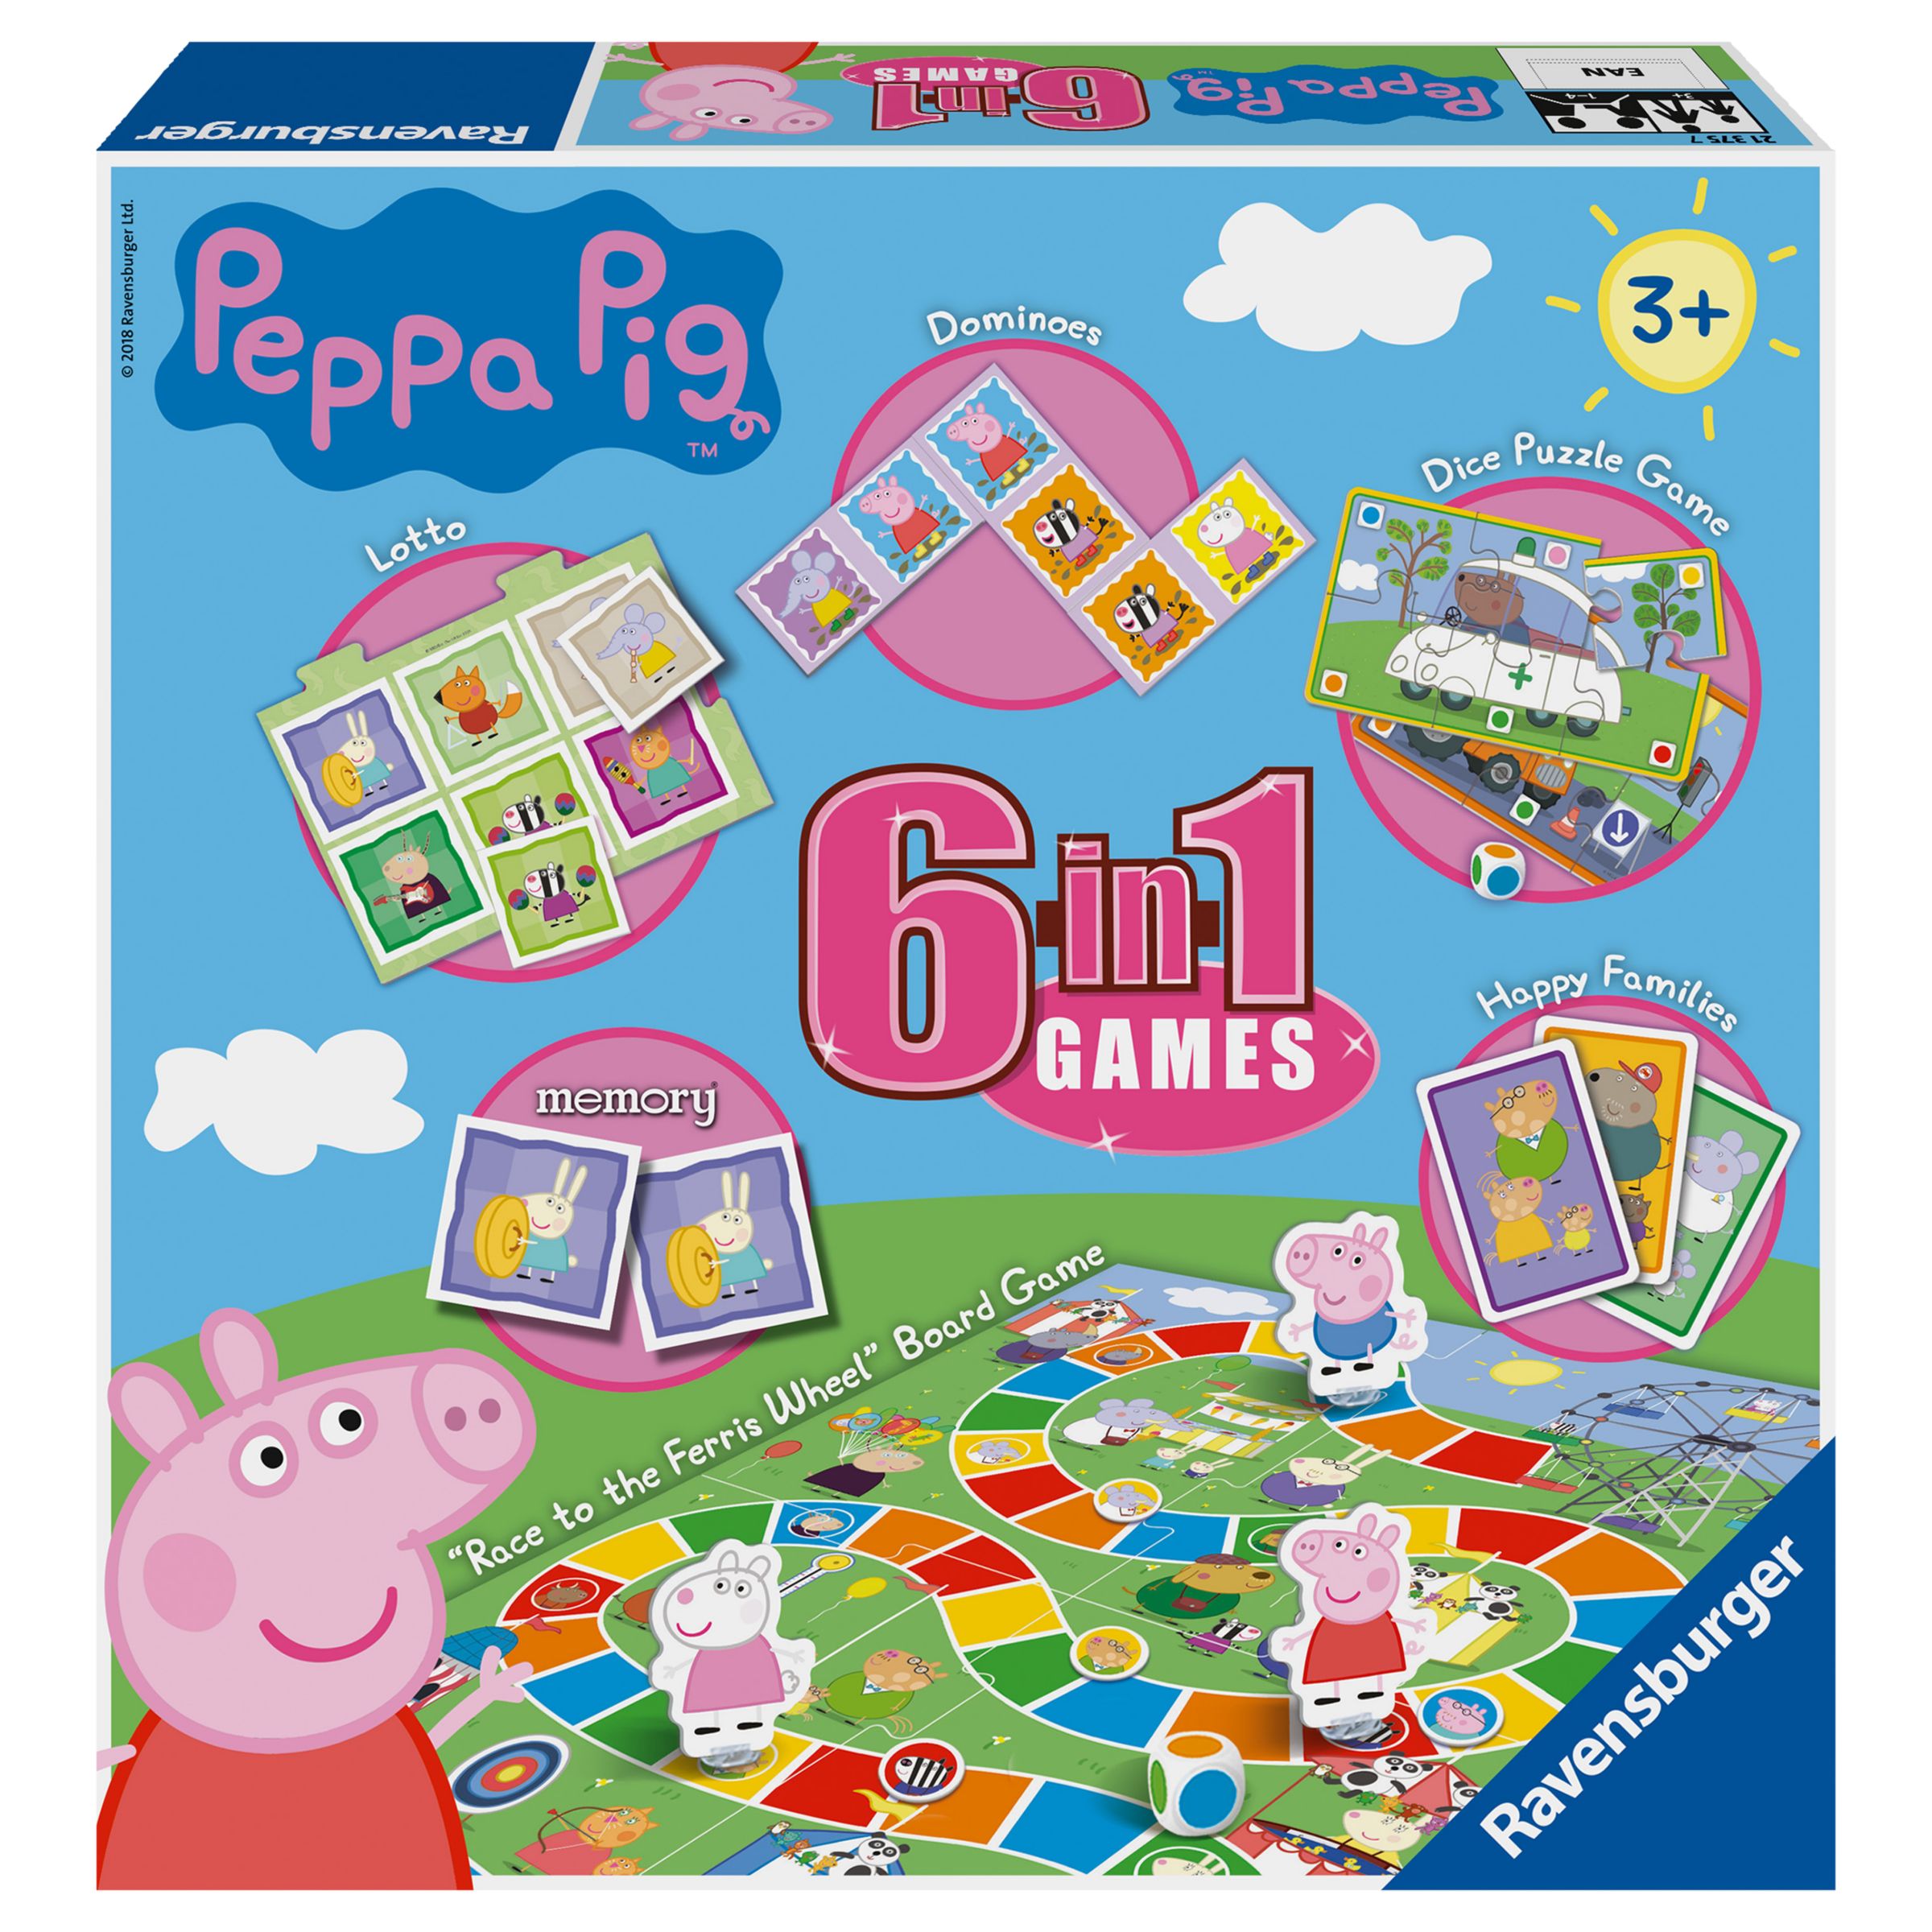 Ravensburger PEPPA PIG Jigsaw Puzzles & Games over 20 to choose from! 